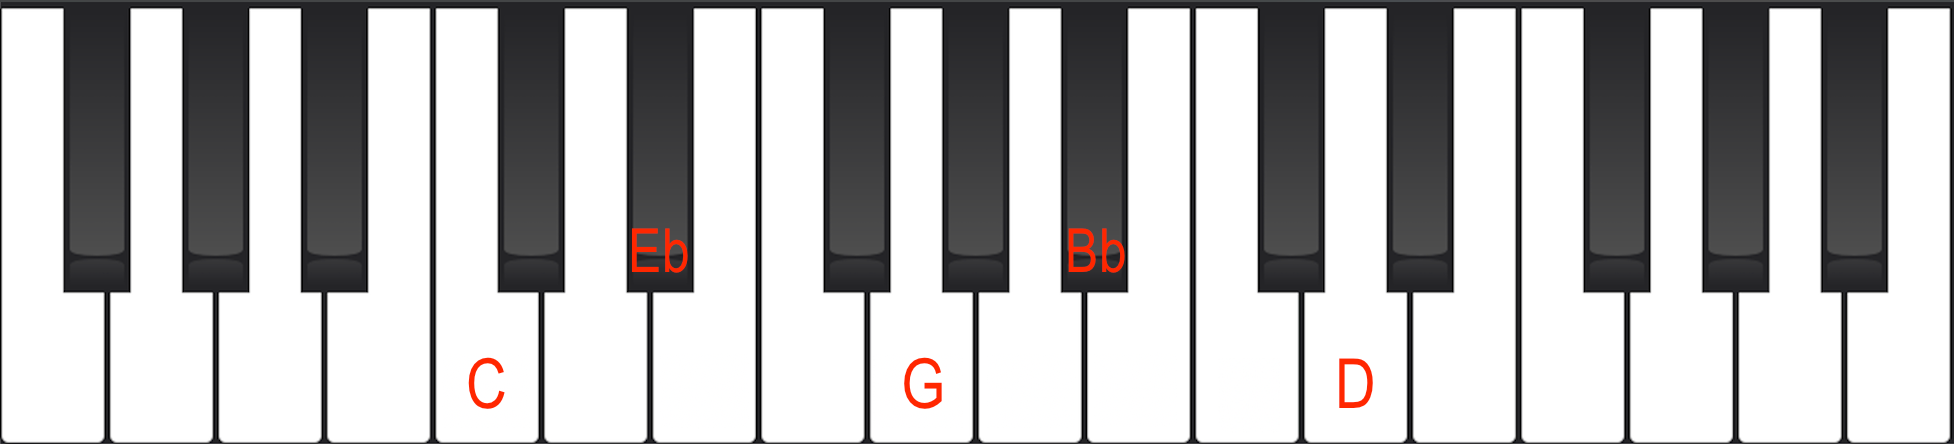 C-9 in close root position on Piano